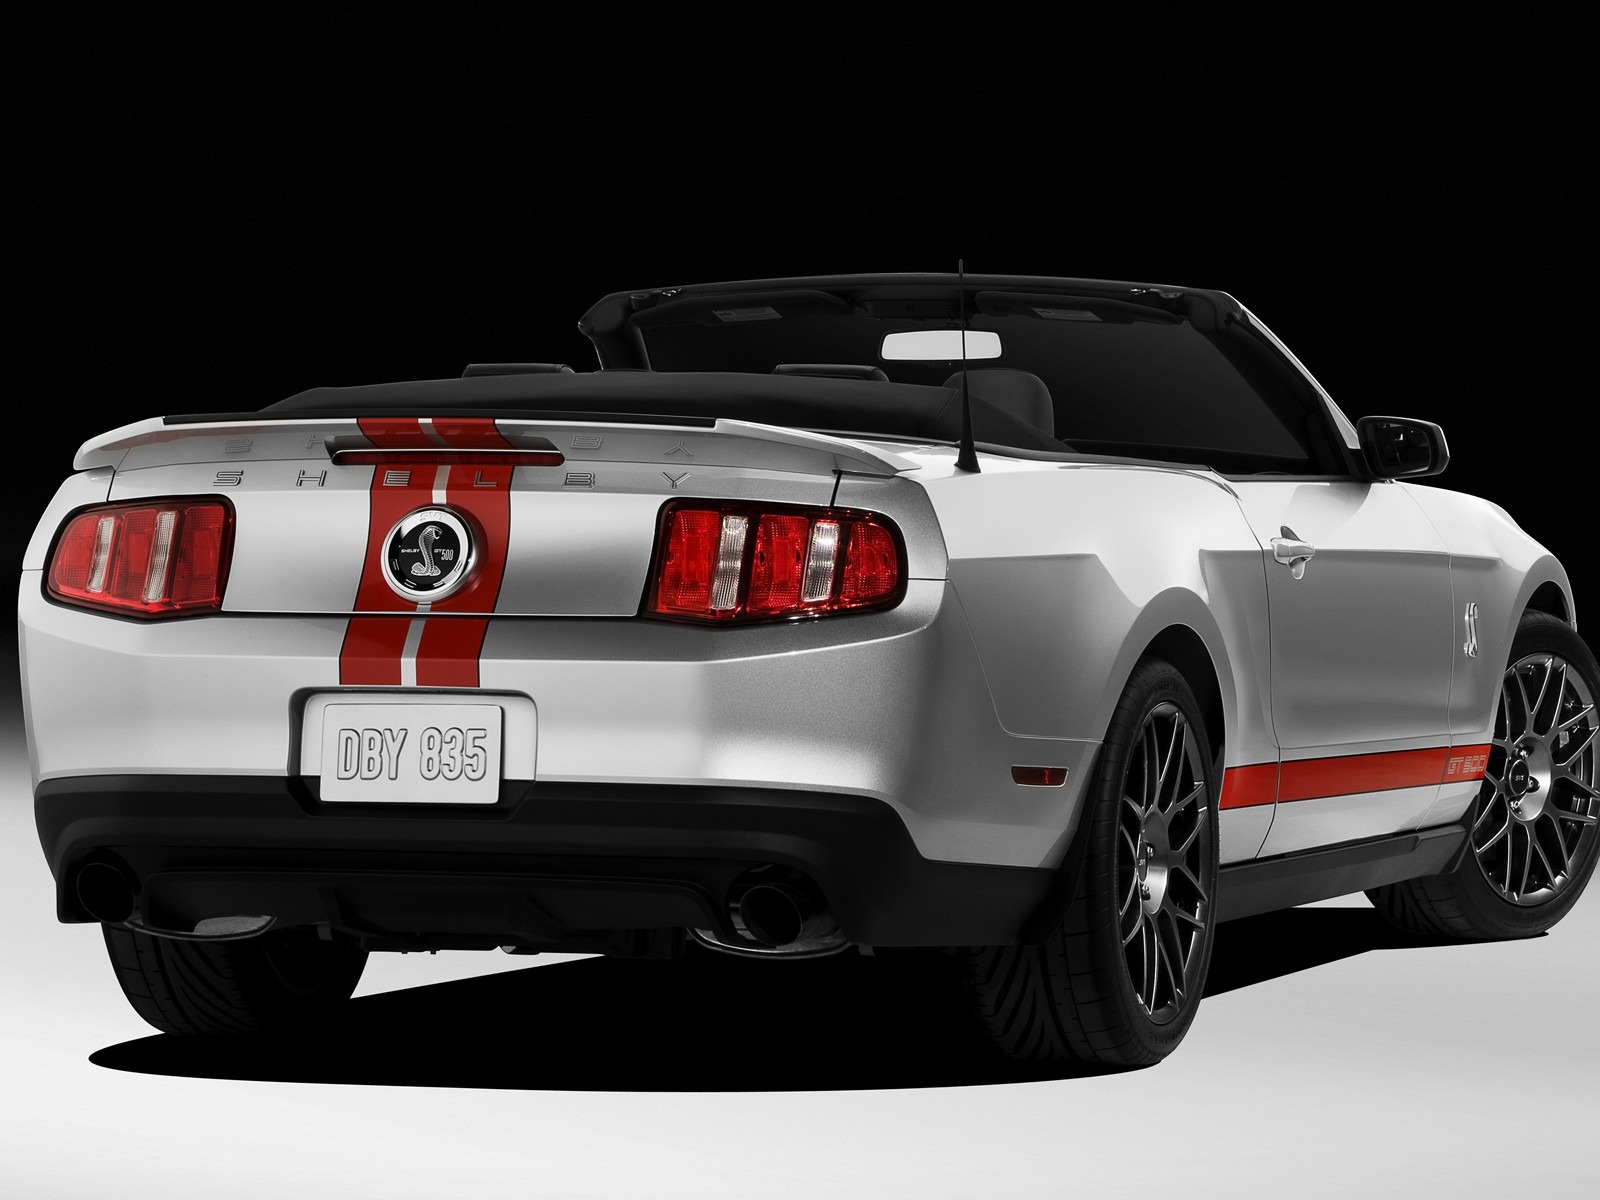 Ford Mustang GT500 Wallpapers #2 - 1600x1200